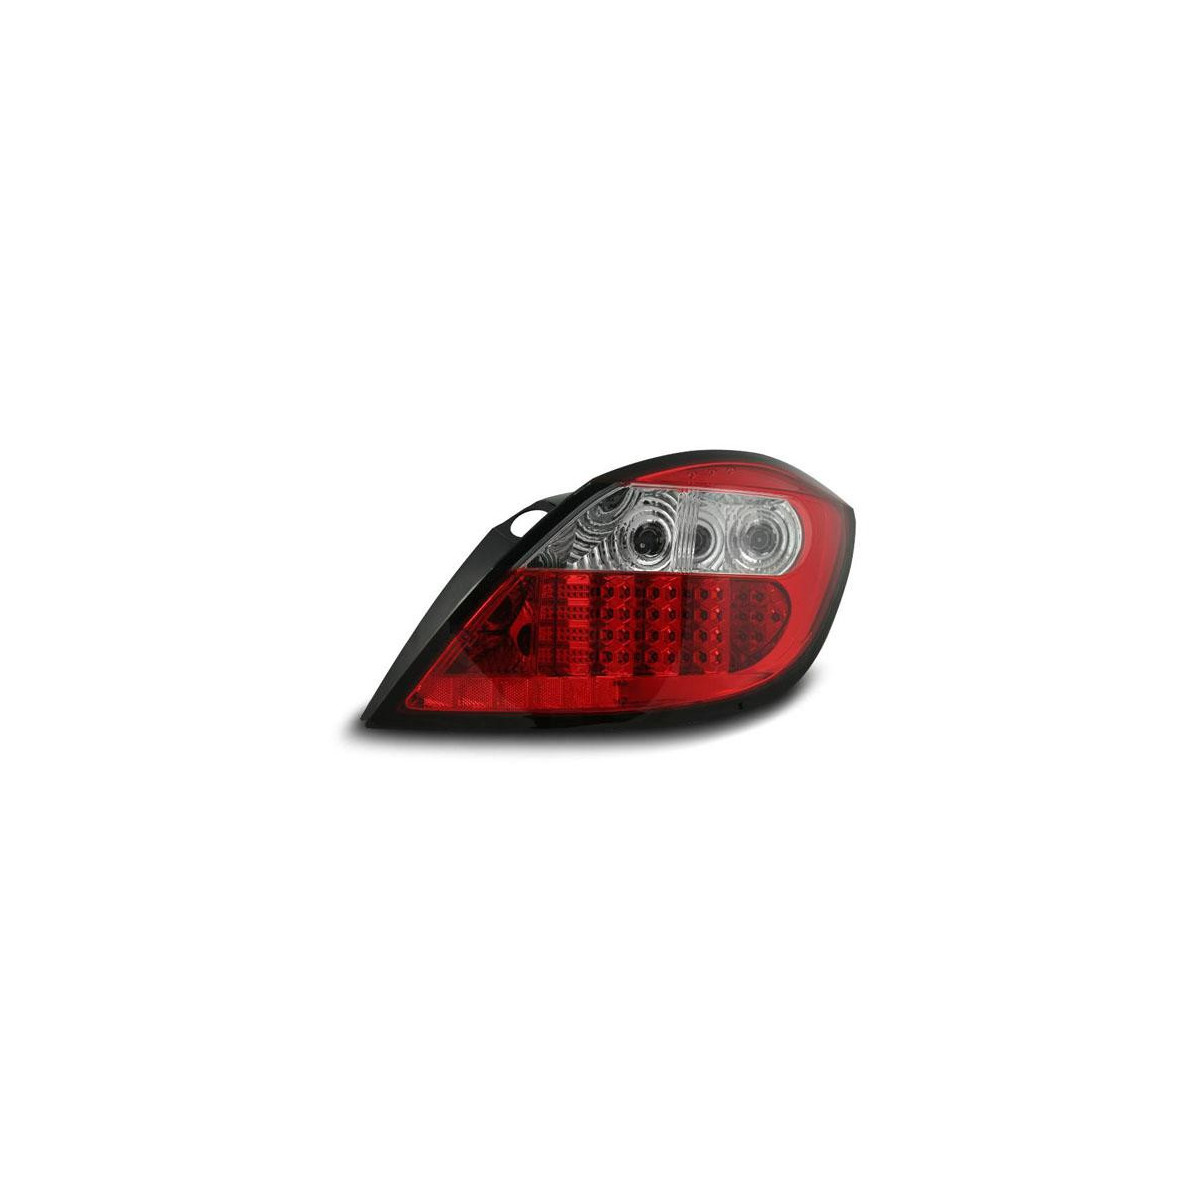 LAMPY TYLNE OPEL ASTRA H- LED RED/WHITE